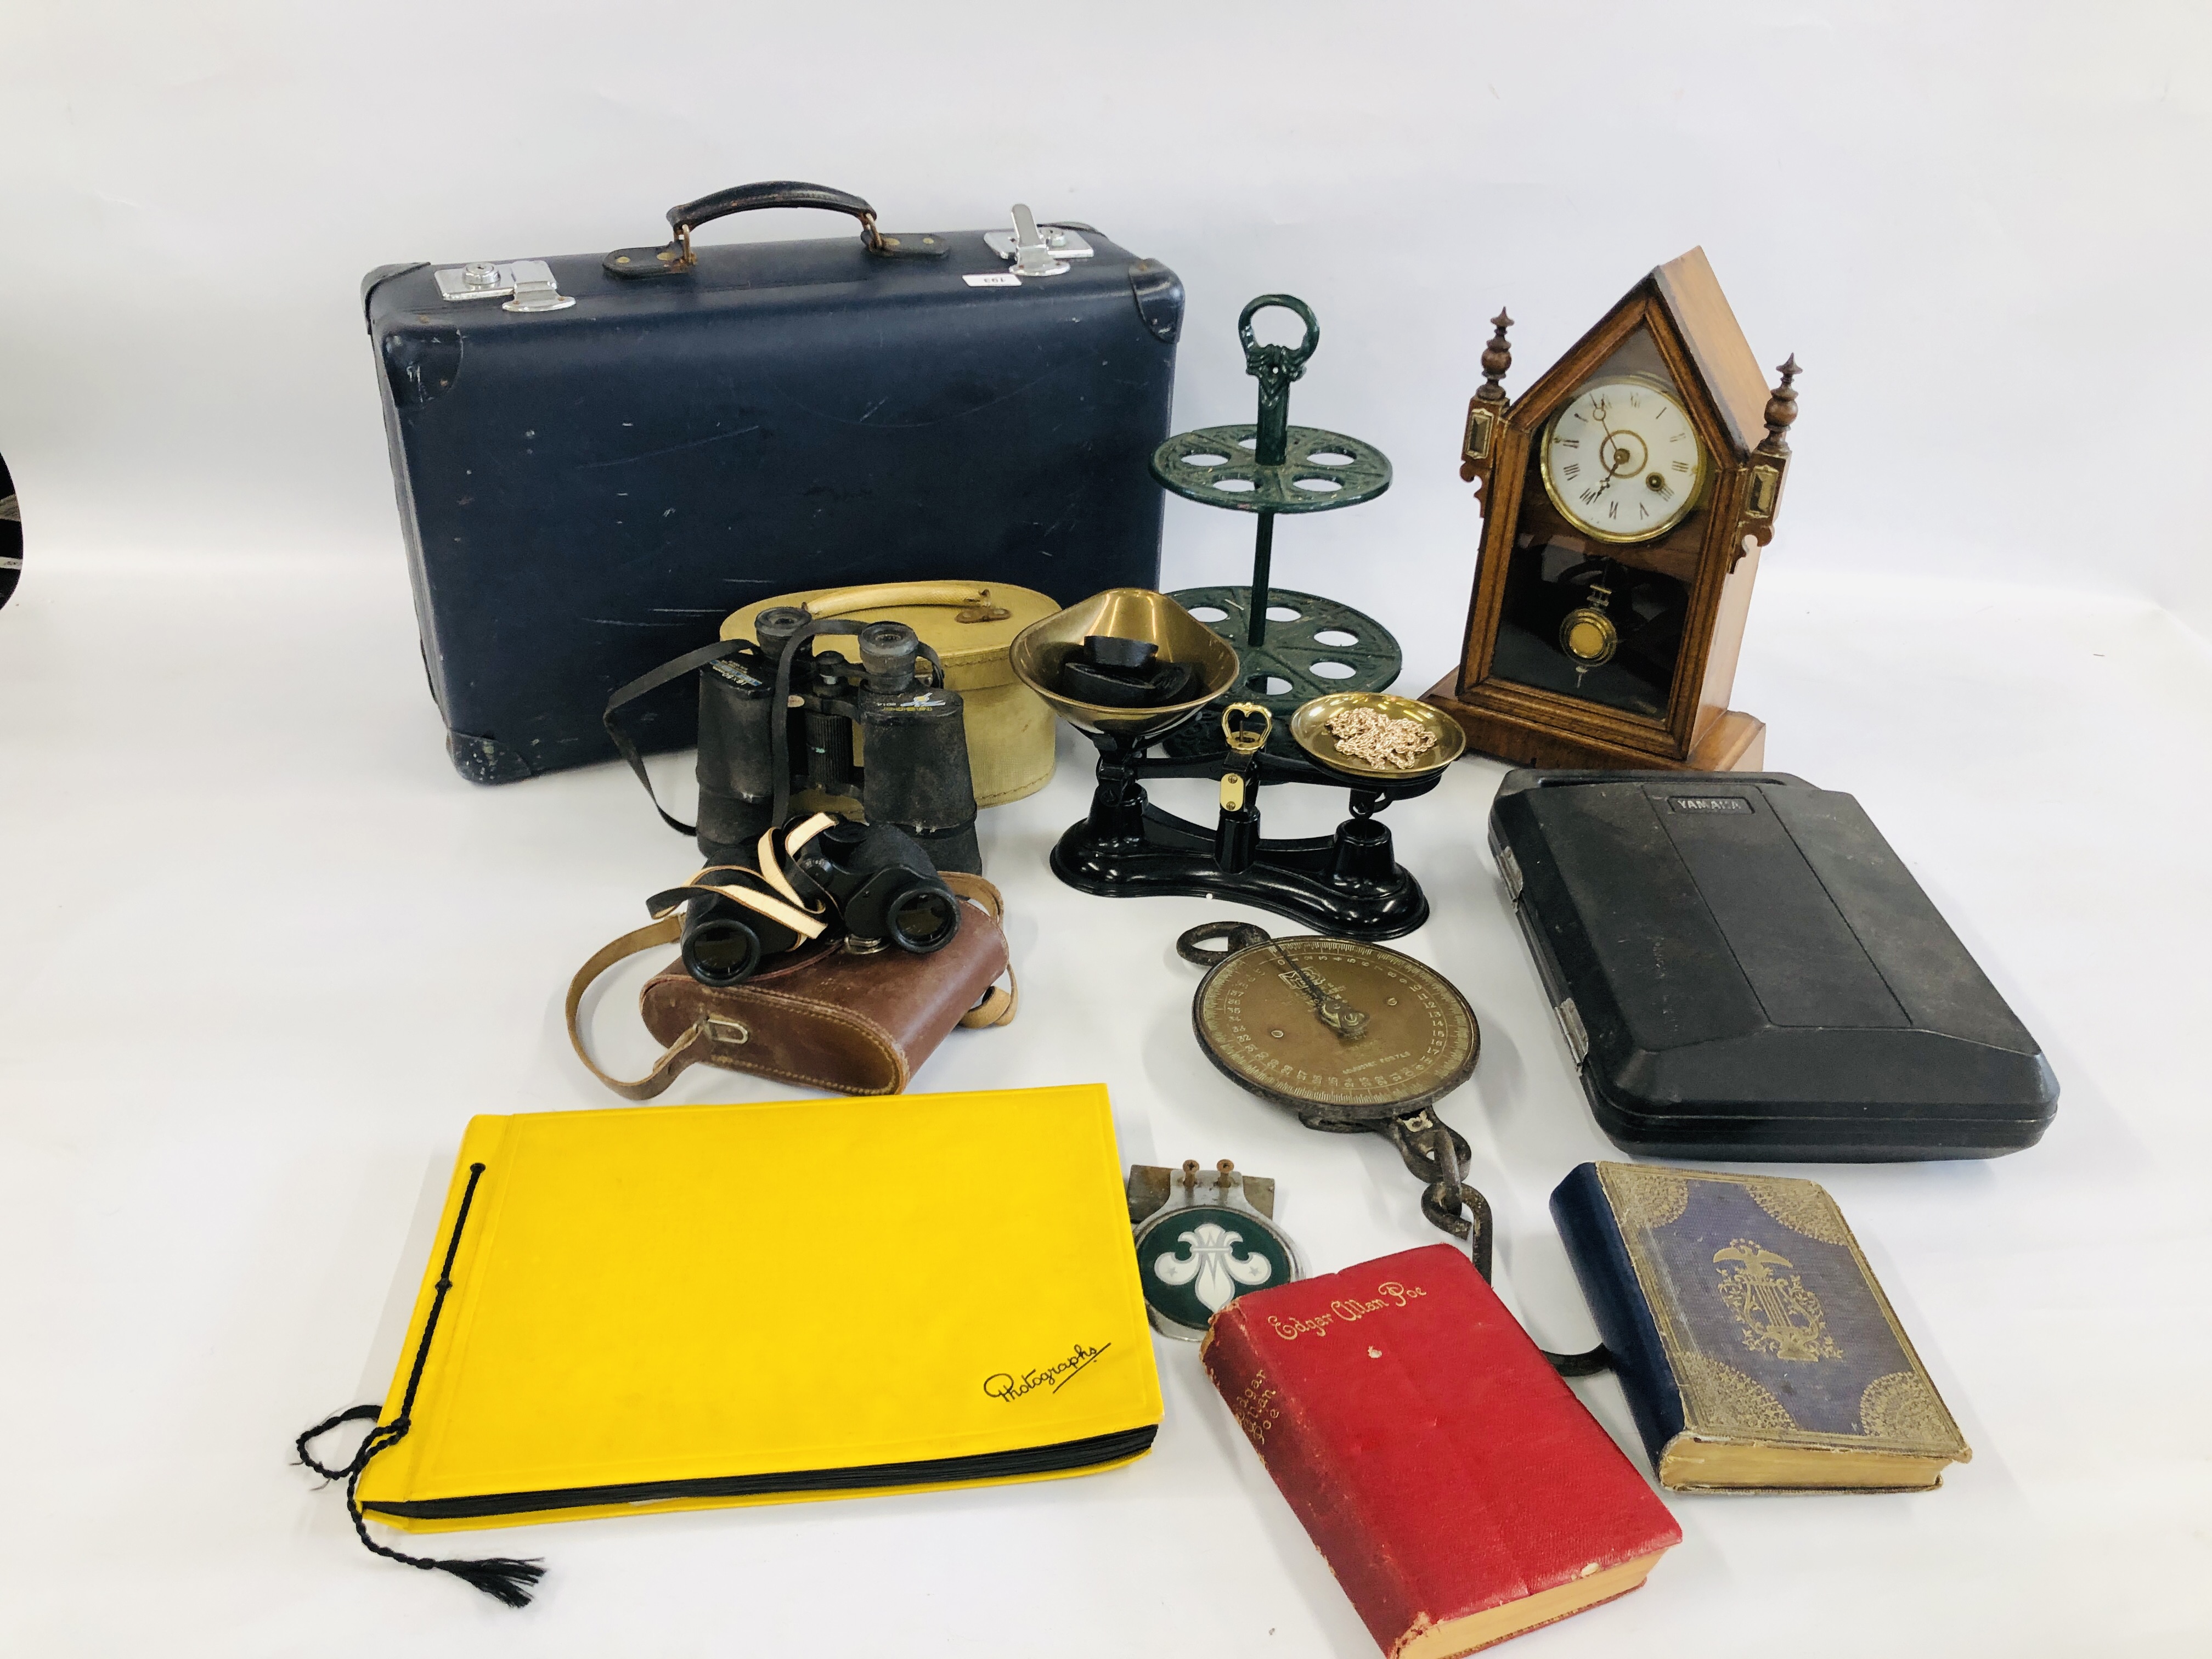 VINTAGE SUITCASE AND CONTENTS TO INCLUDE COLLECTIBLES, VINTAGE SALTER SCALES, ALBUM OF PHOTOGRAPHS,